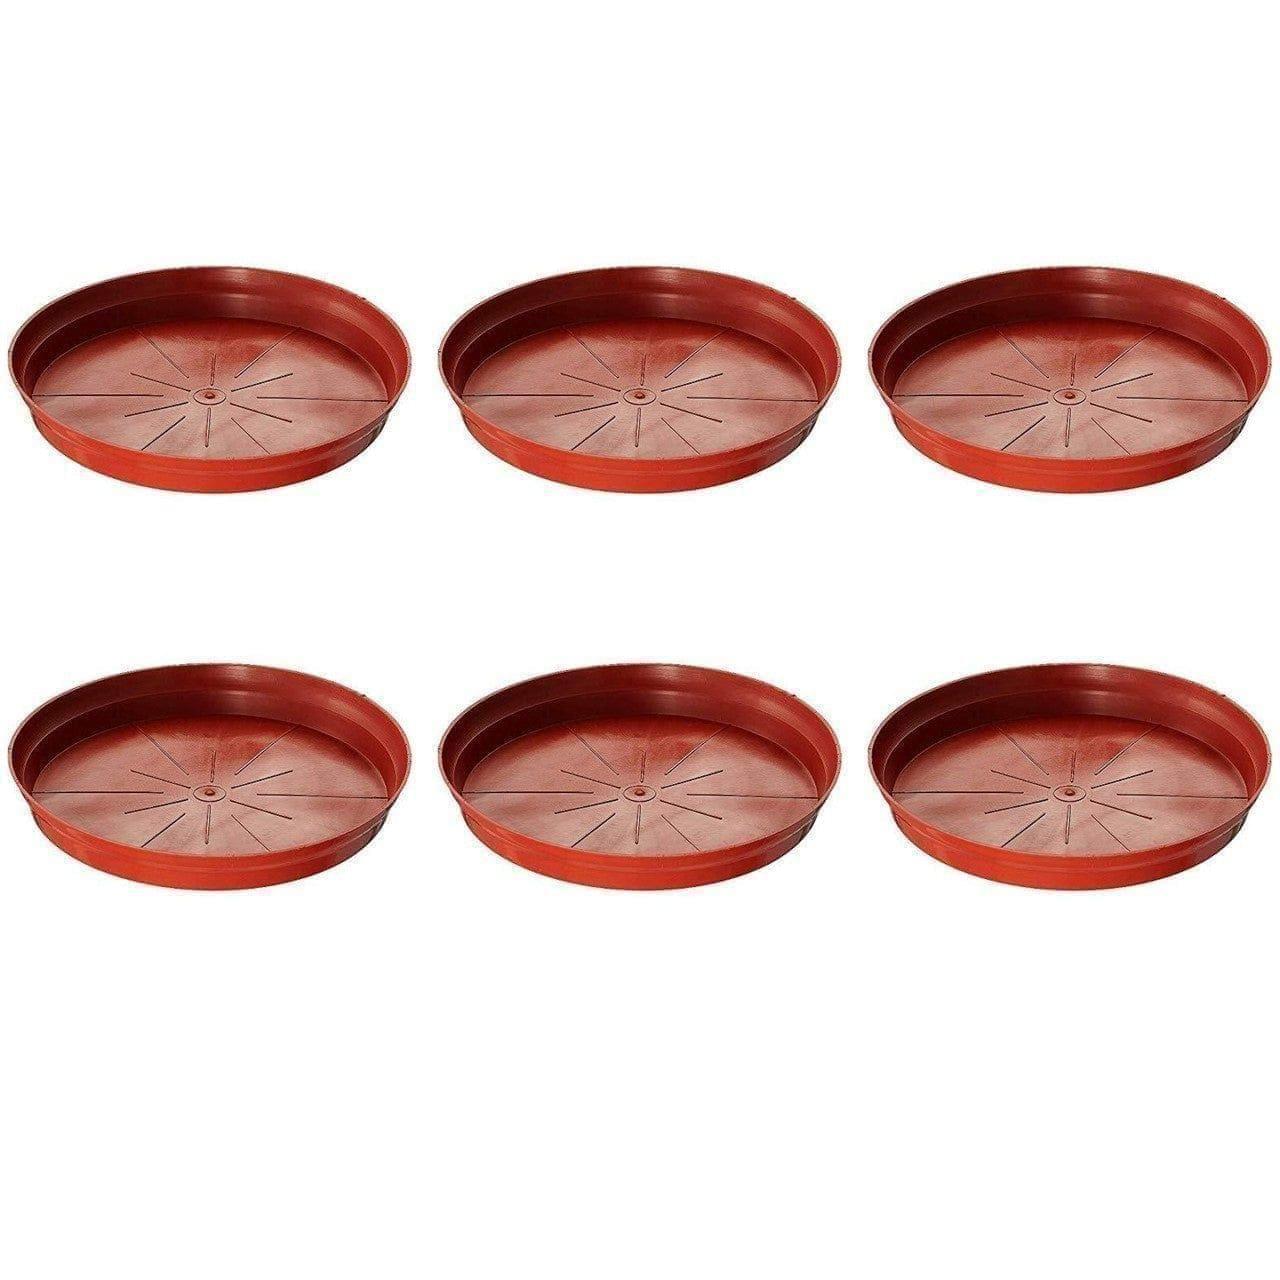 Set of 6 - 12 Inch Red Plastic Plate